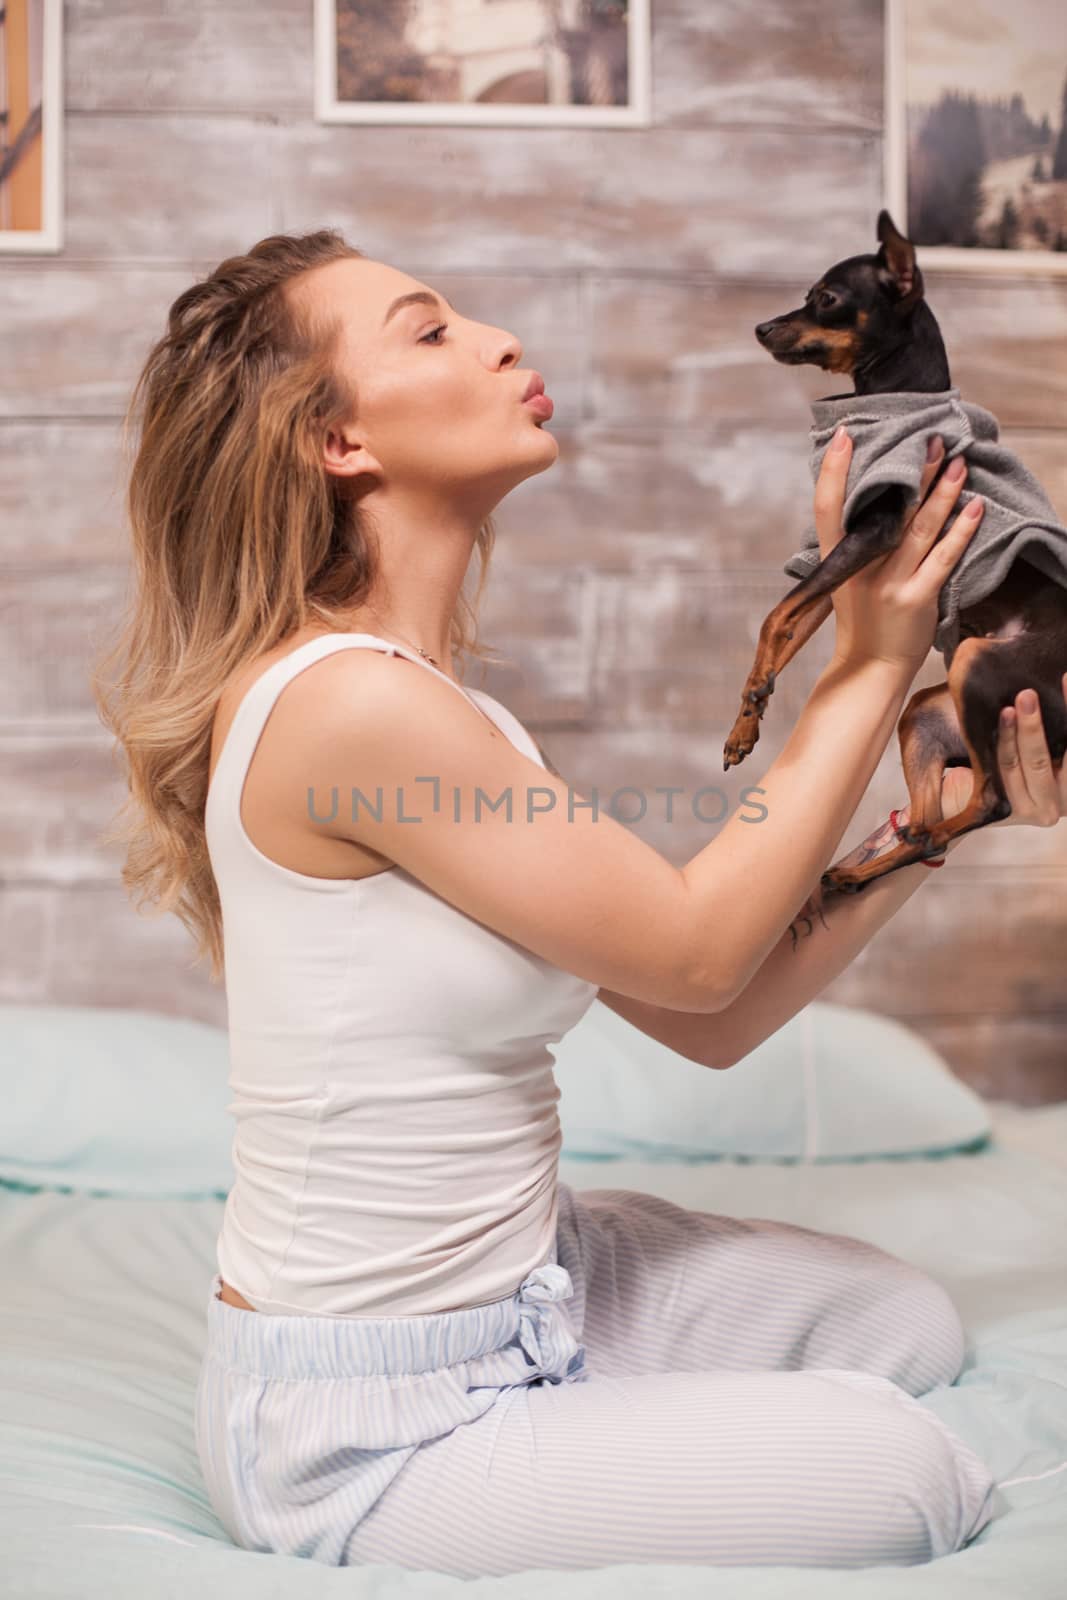 Blonde beautiful woman in her pajamas at night having fun with her dog on bed.